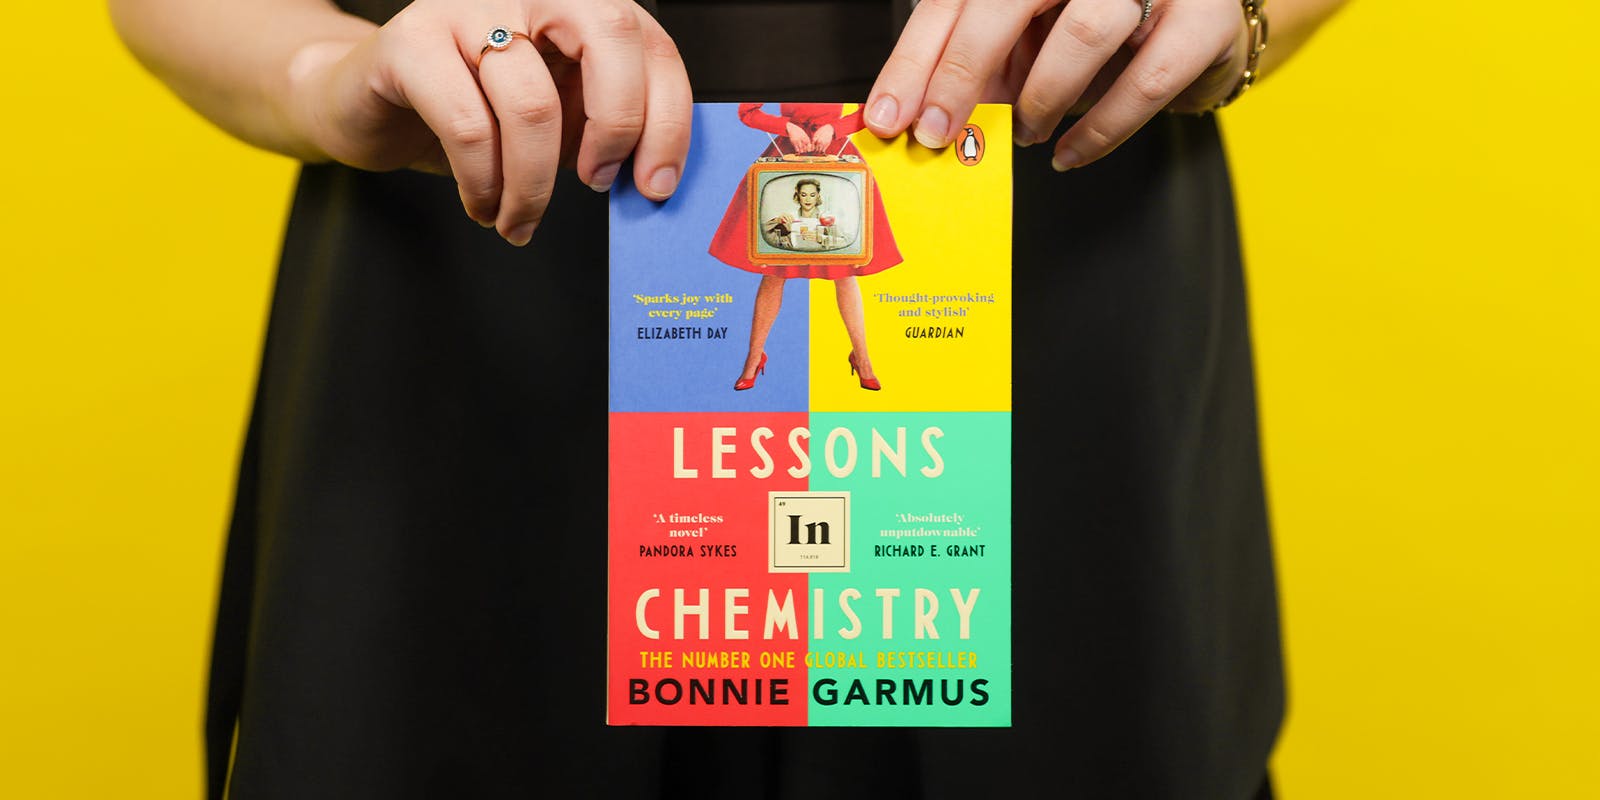 Meet the characters from Lessons in Chemistry